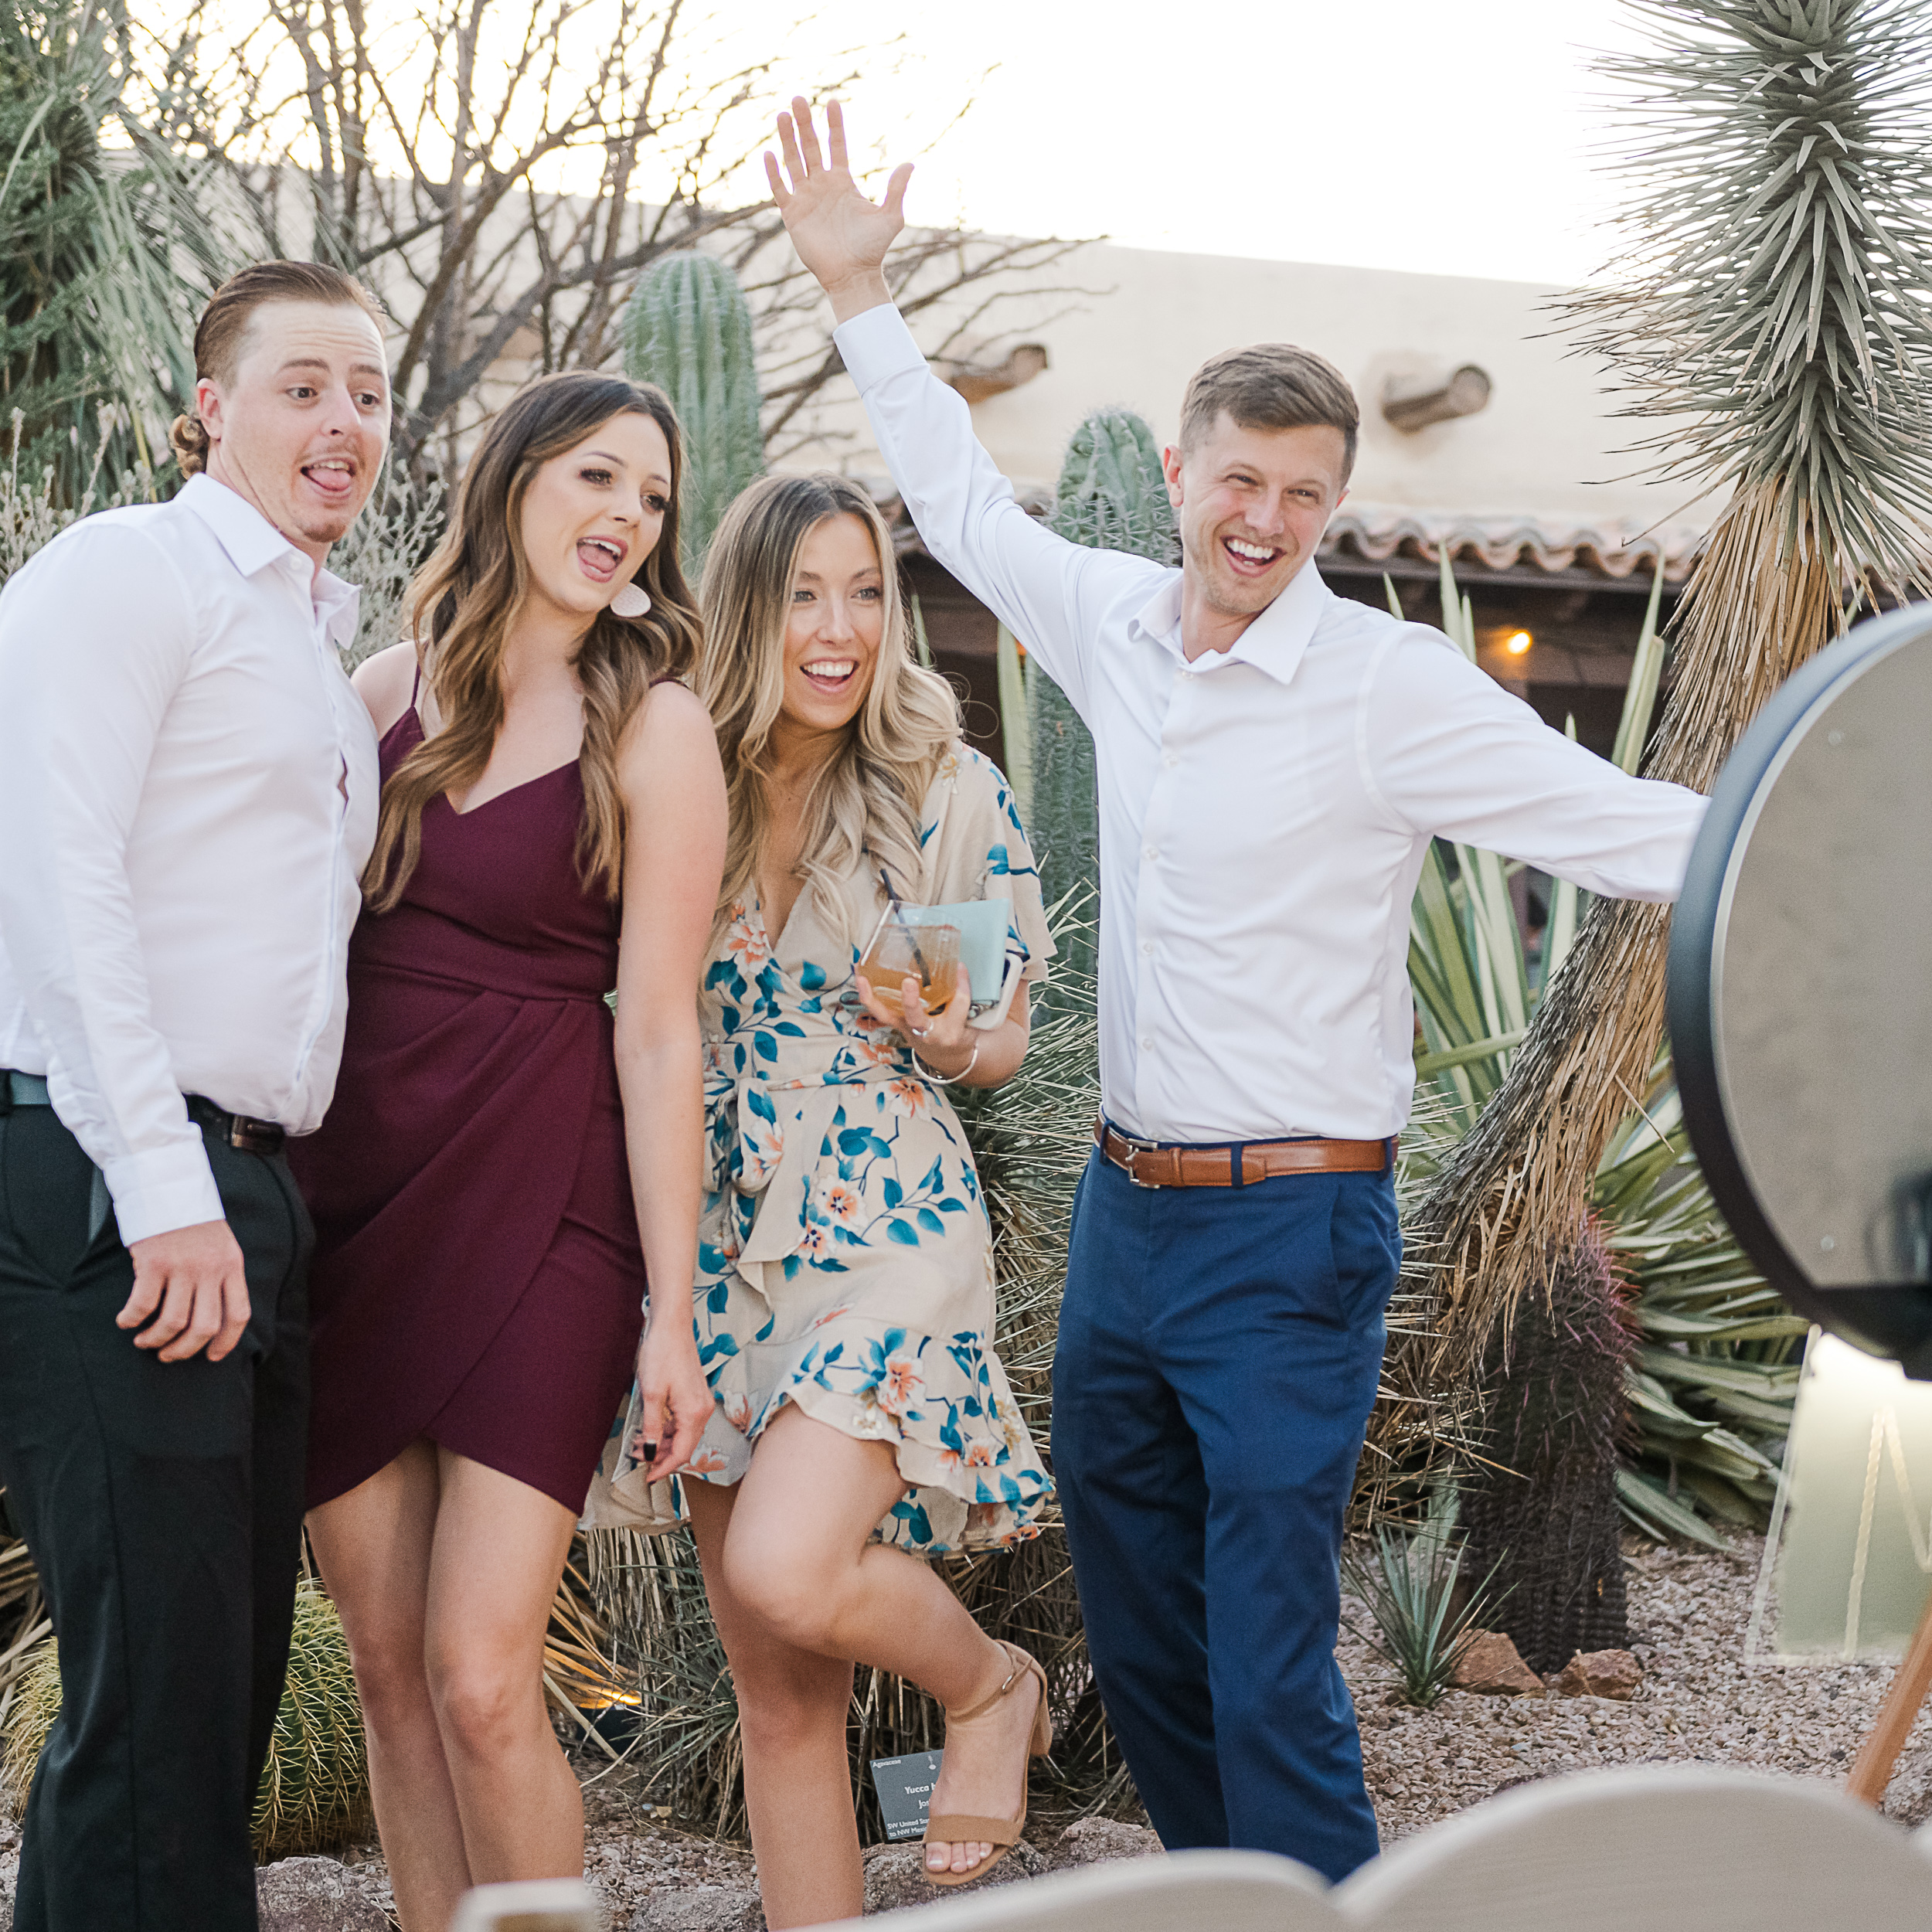 Supplement your Wedding Photos with a fun Photo Booth Rental in Phoenix